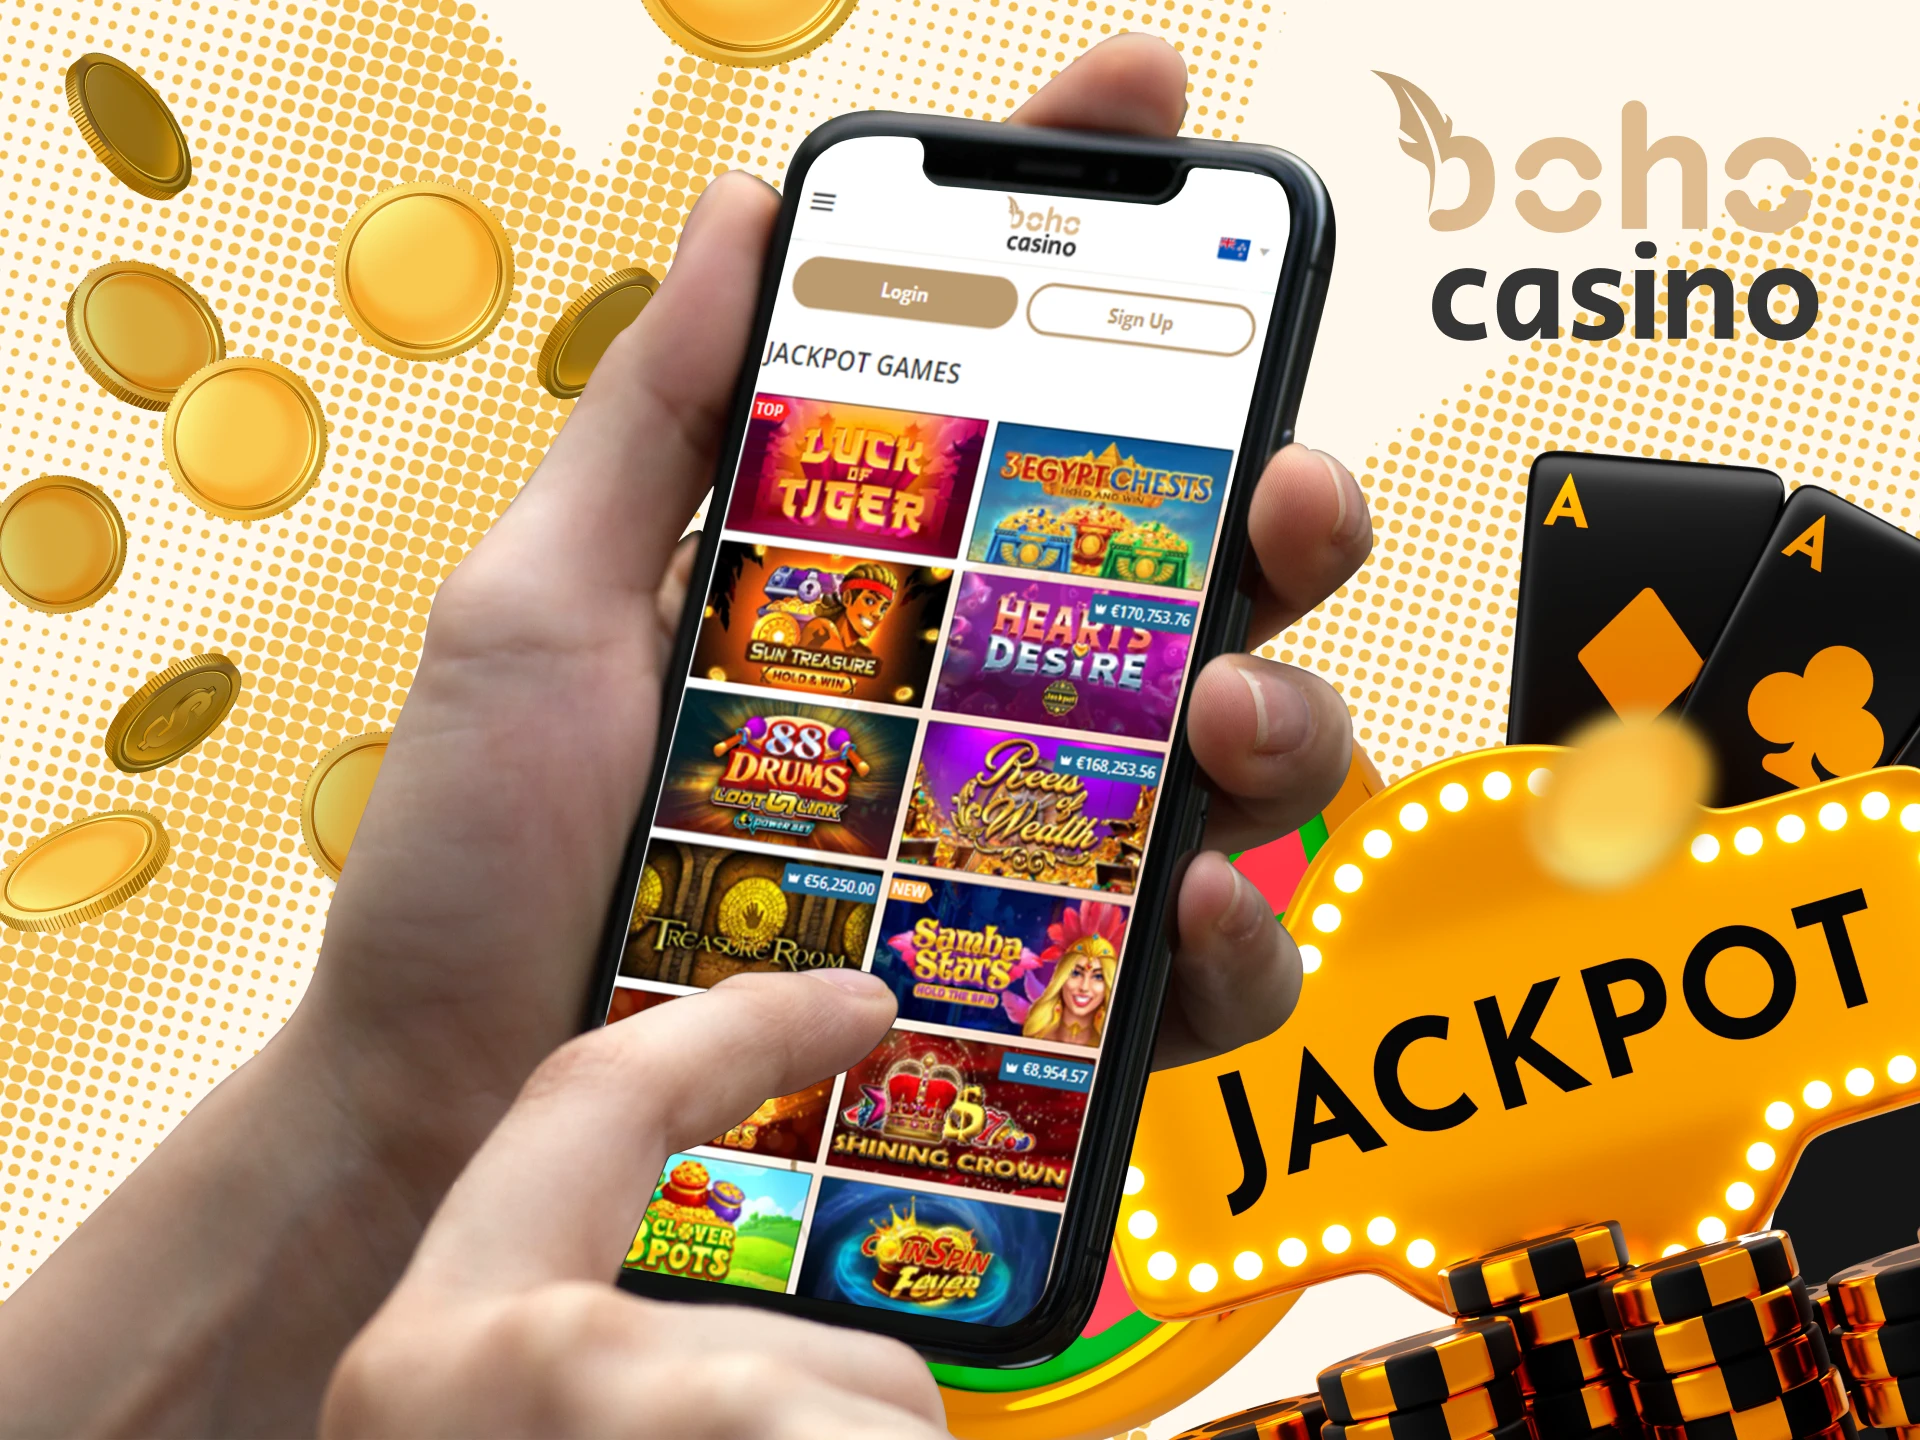 Download and install the app to play Boho Casino jackpots via phone.